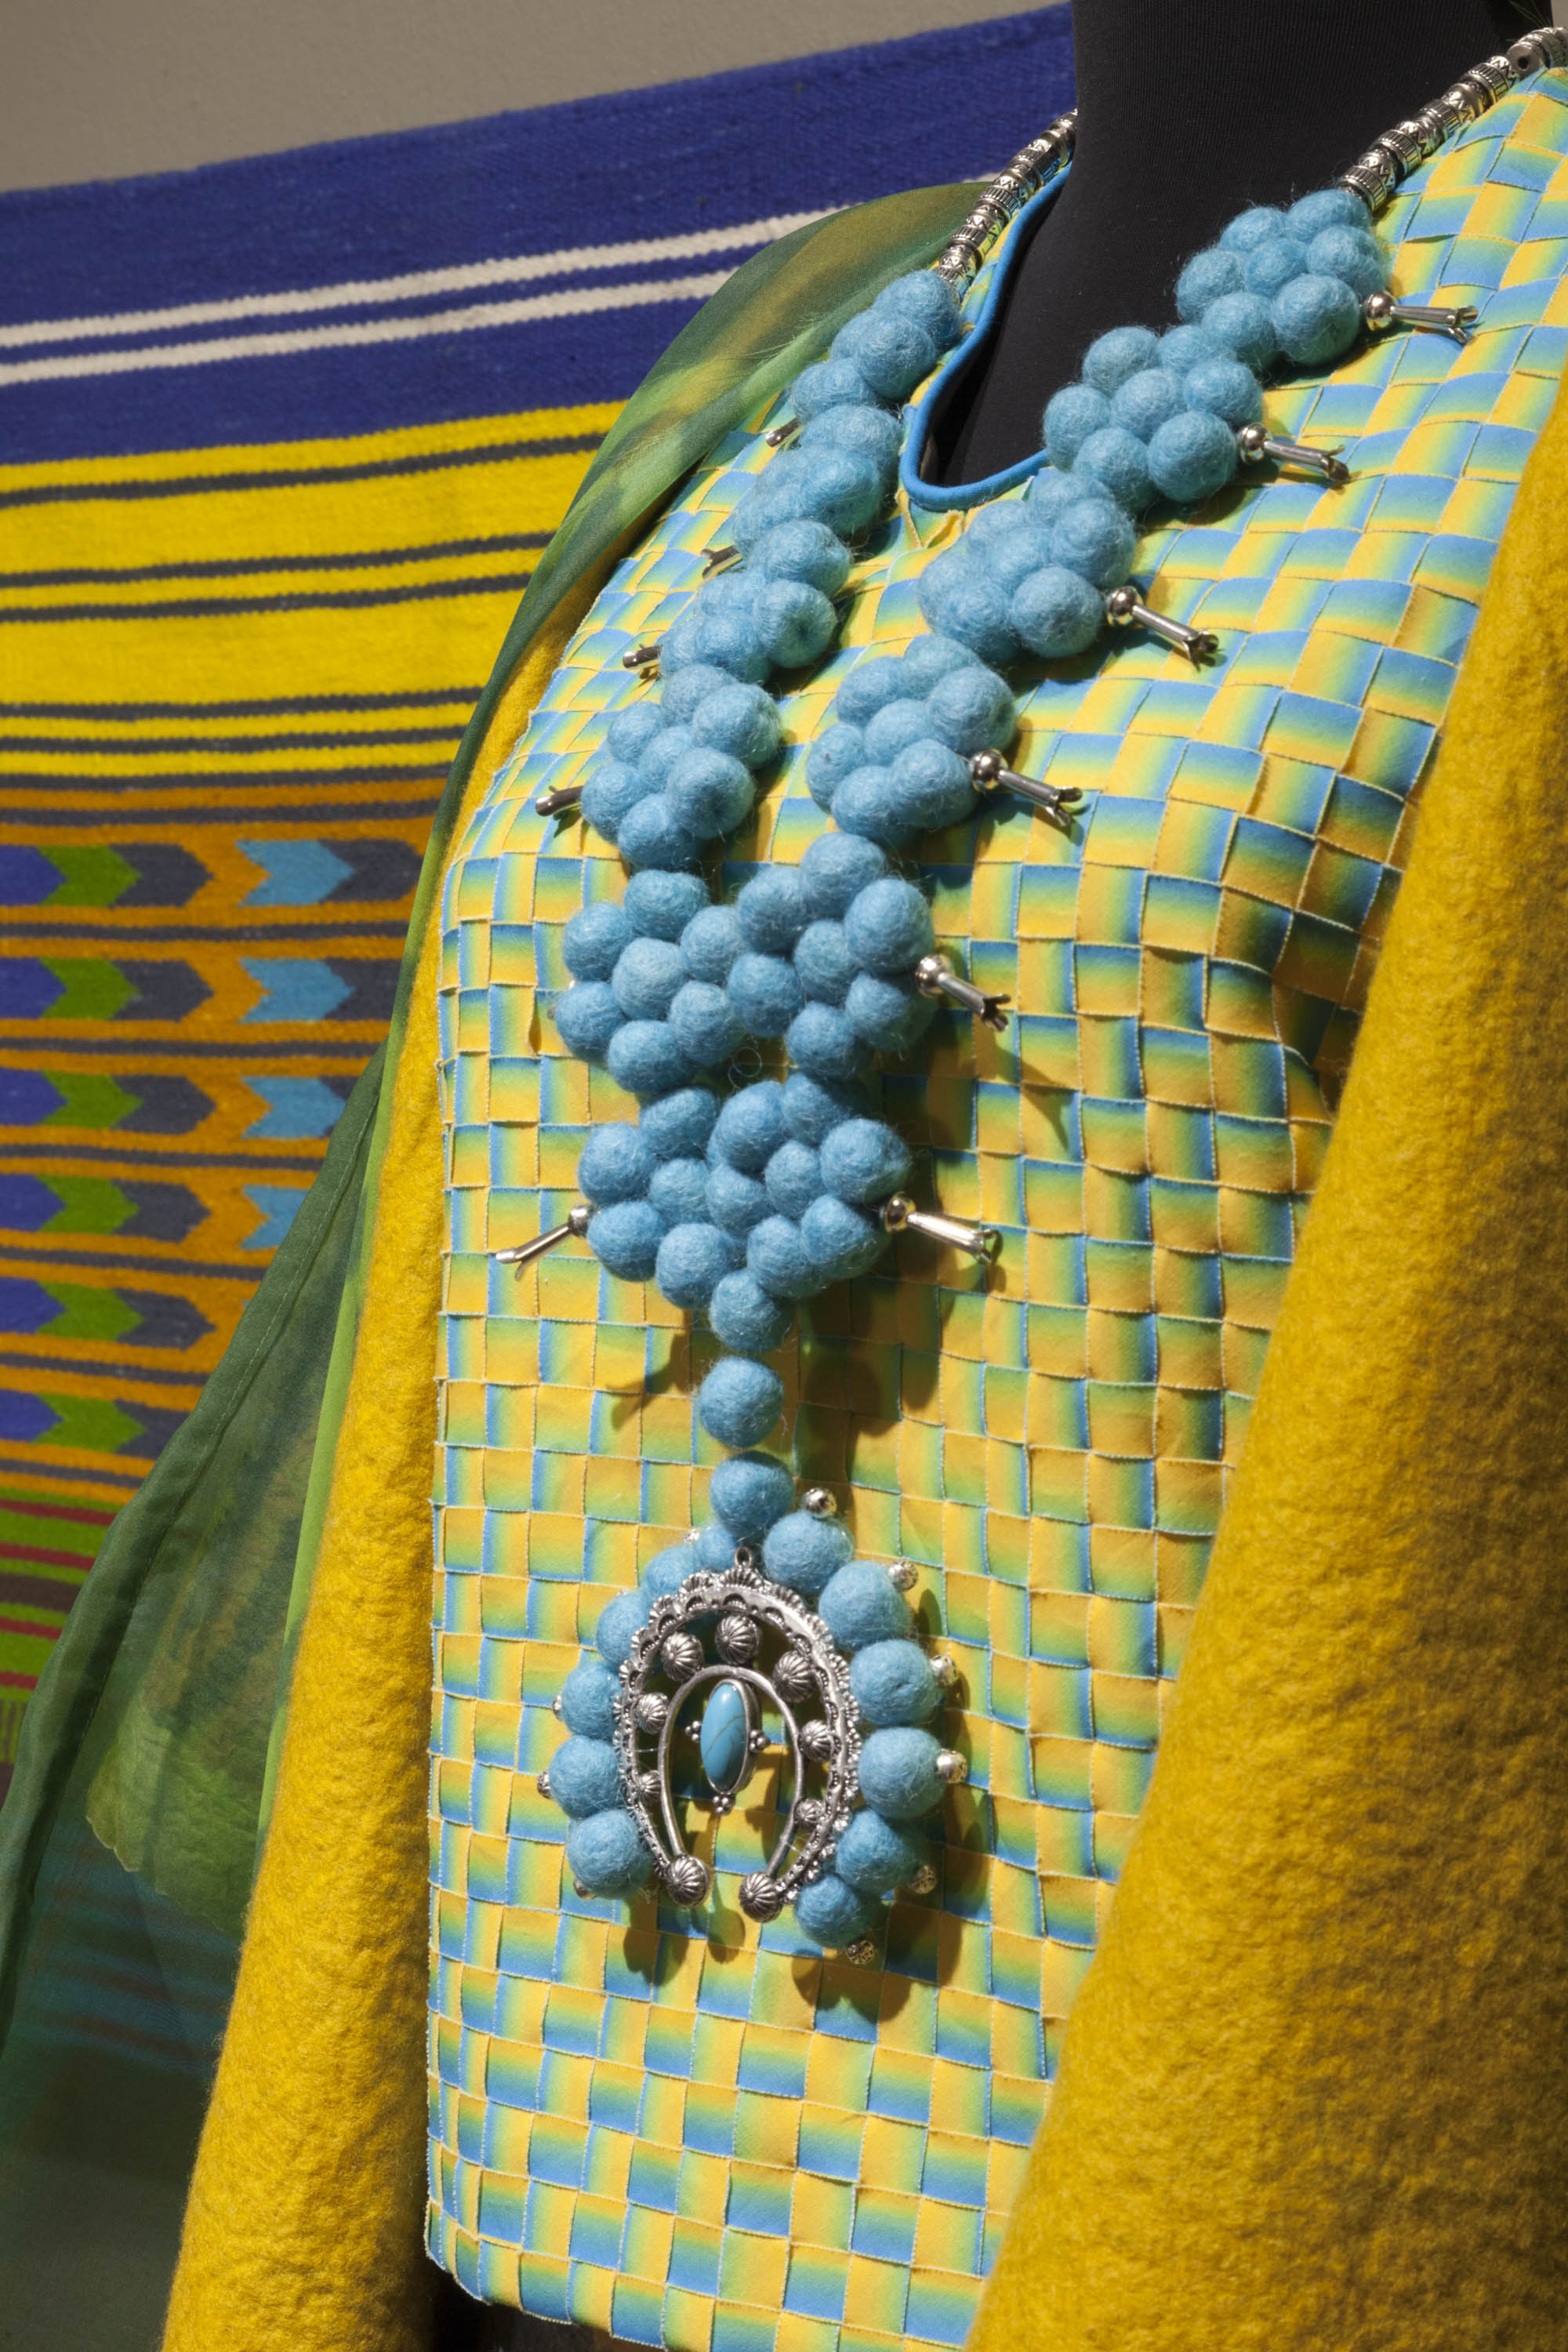 This photograph features a close-up of a necklace and blouse displayed on a mannequin. The necklace, inspired by traditional Navajo designs, is made of felted blue wool balls and silver. The woven blouse is yellow and blue. A wool rug is hanging on the wall behind the mannequin.